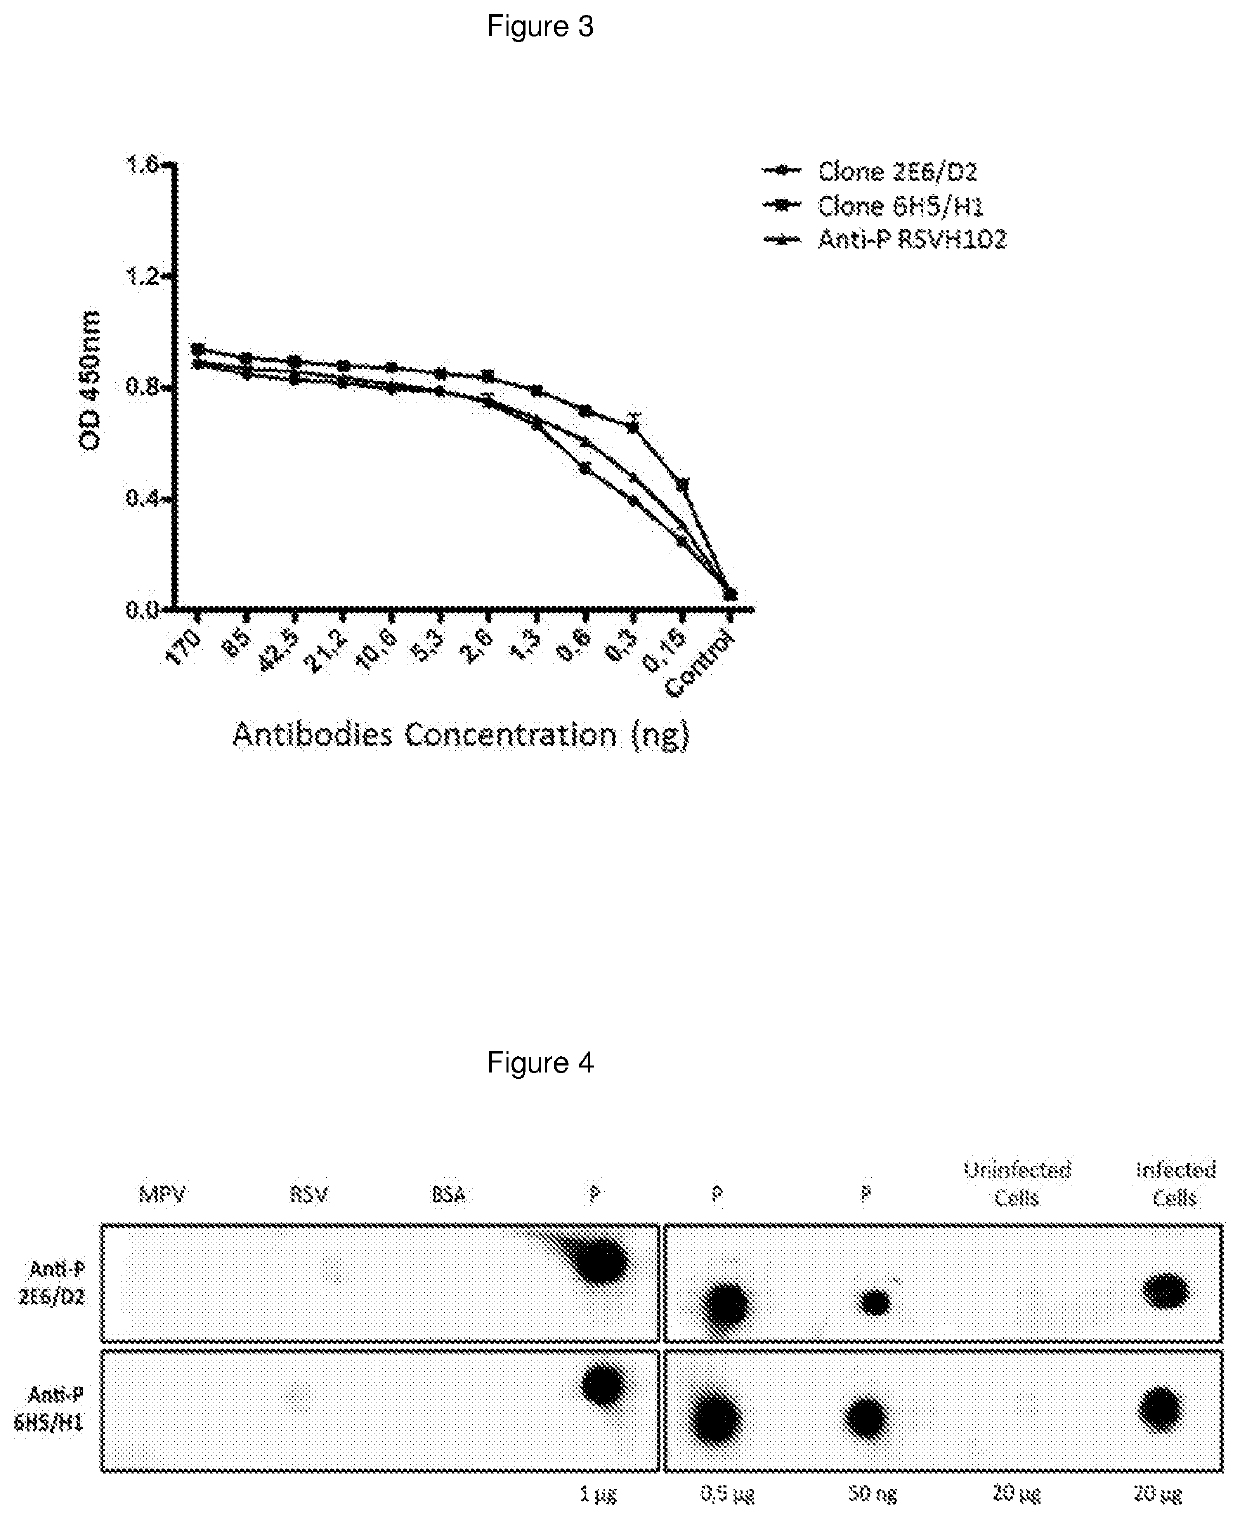 Monoclonal antibodies specifically for the antigen P of the human respiratory syncytial virus, produced and secreted by the cells hybridomas, useful for detection and diagnostic of the infection caused by RSV